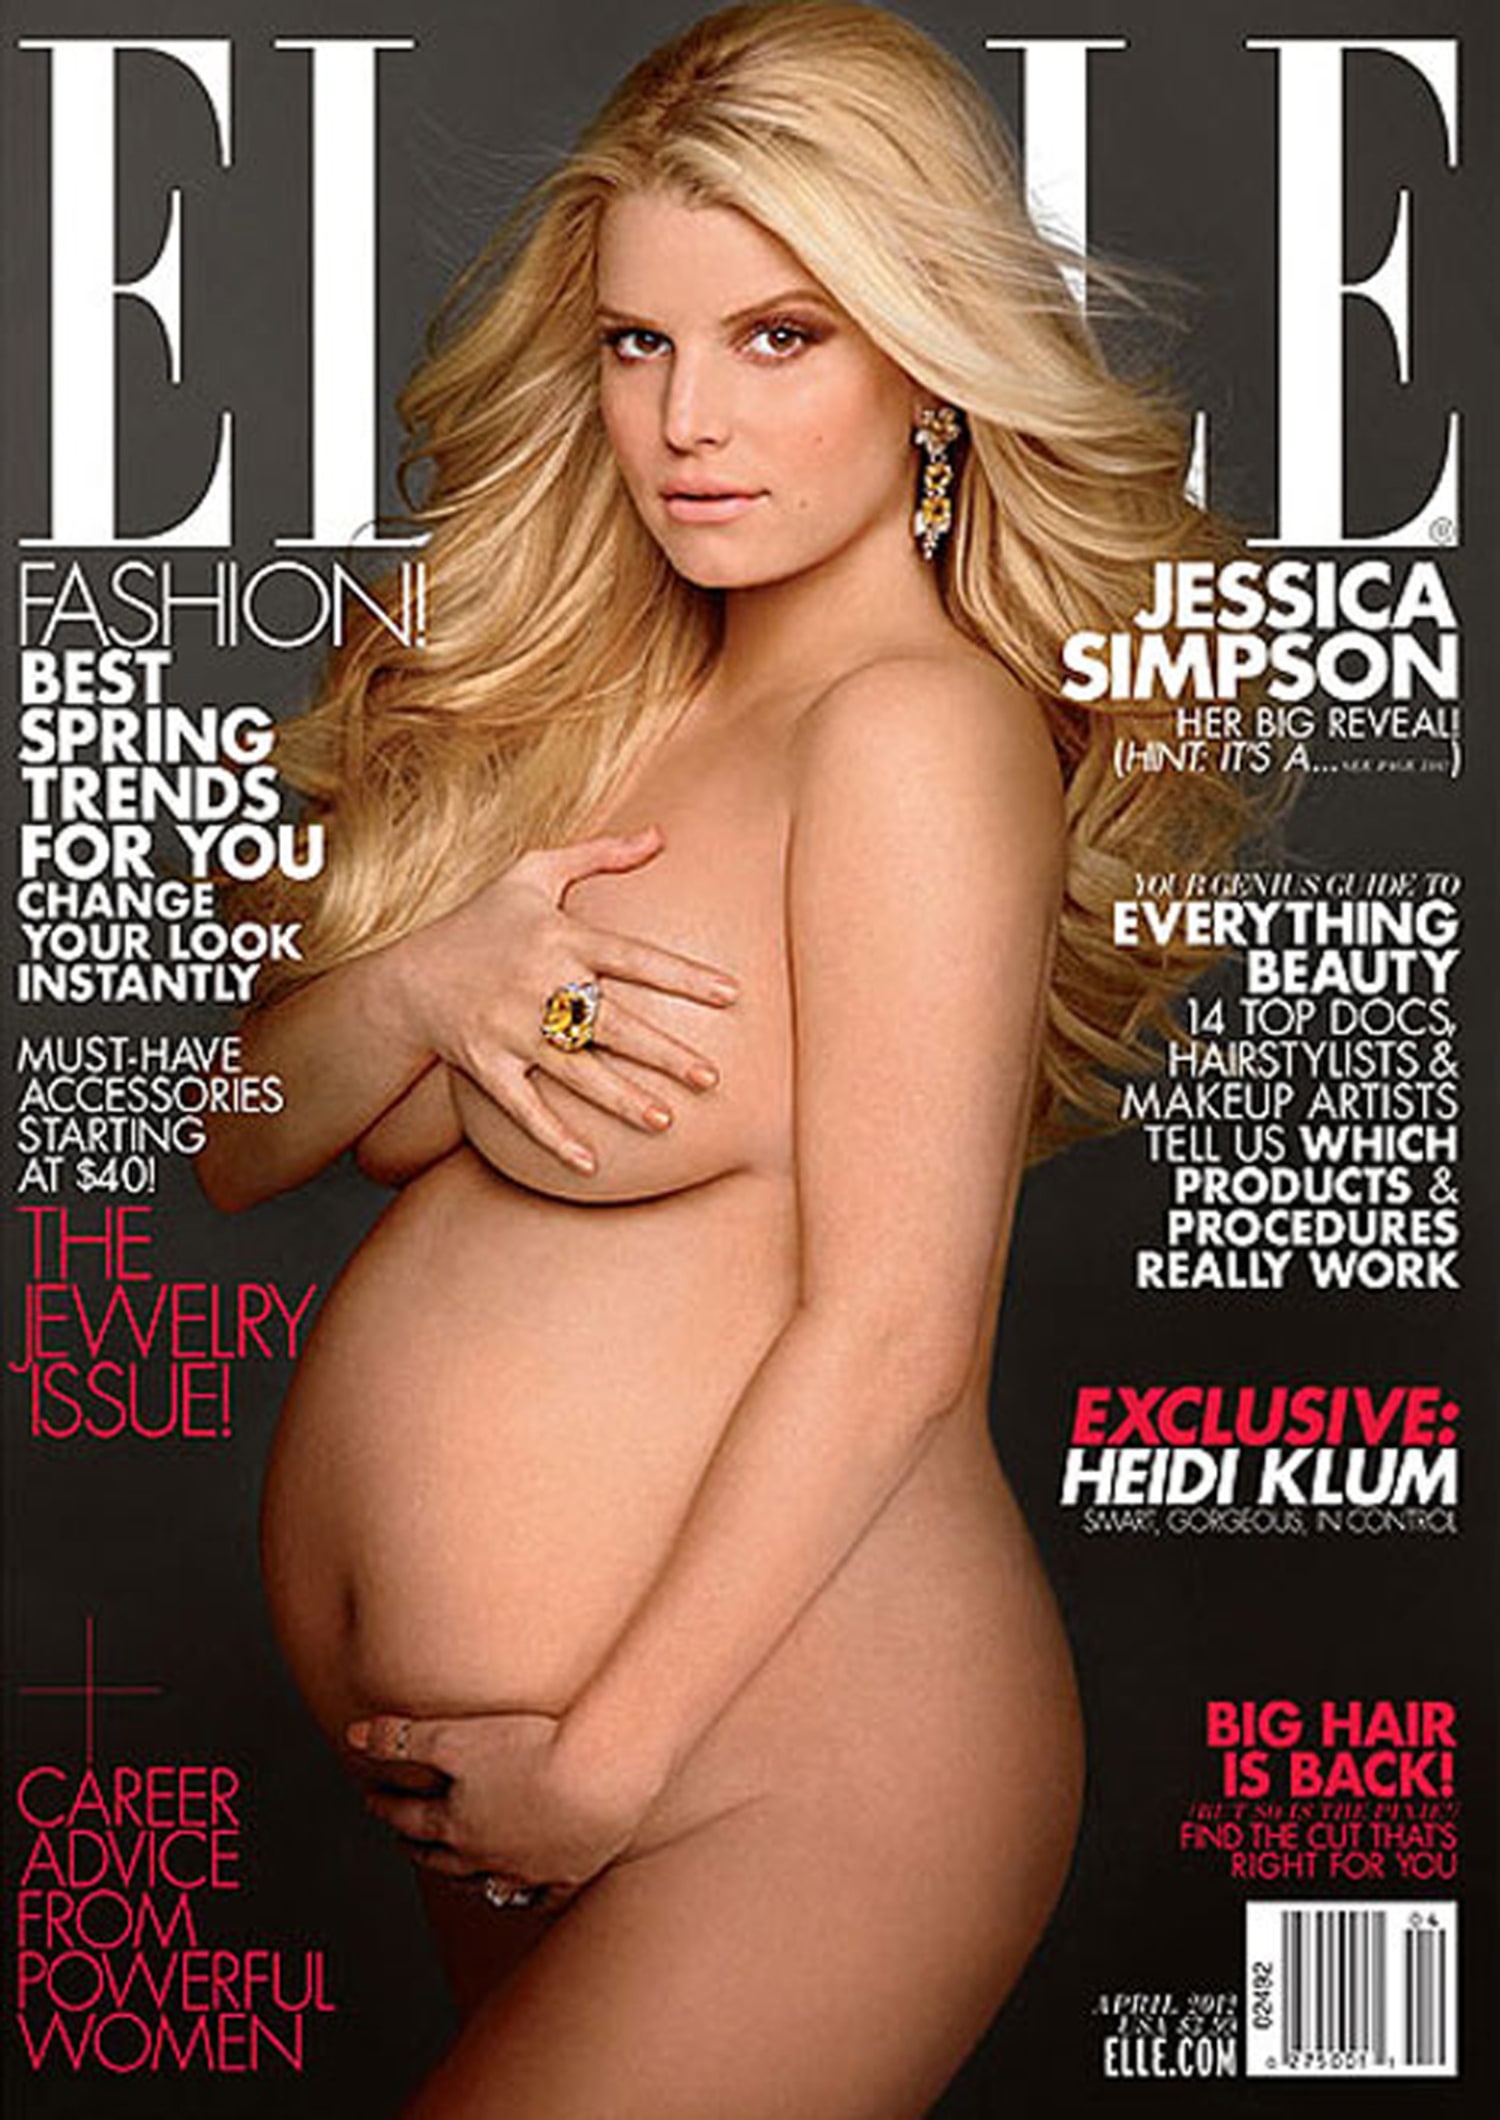 chrise edwards recommends jessica simpson naked photo pic